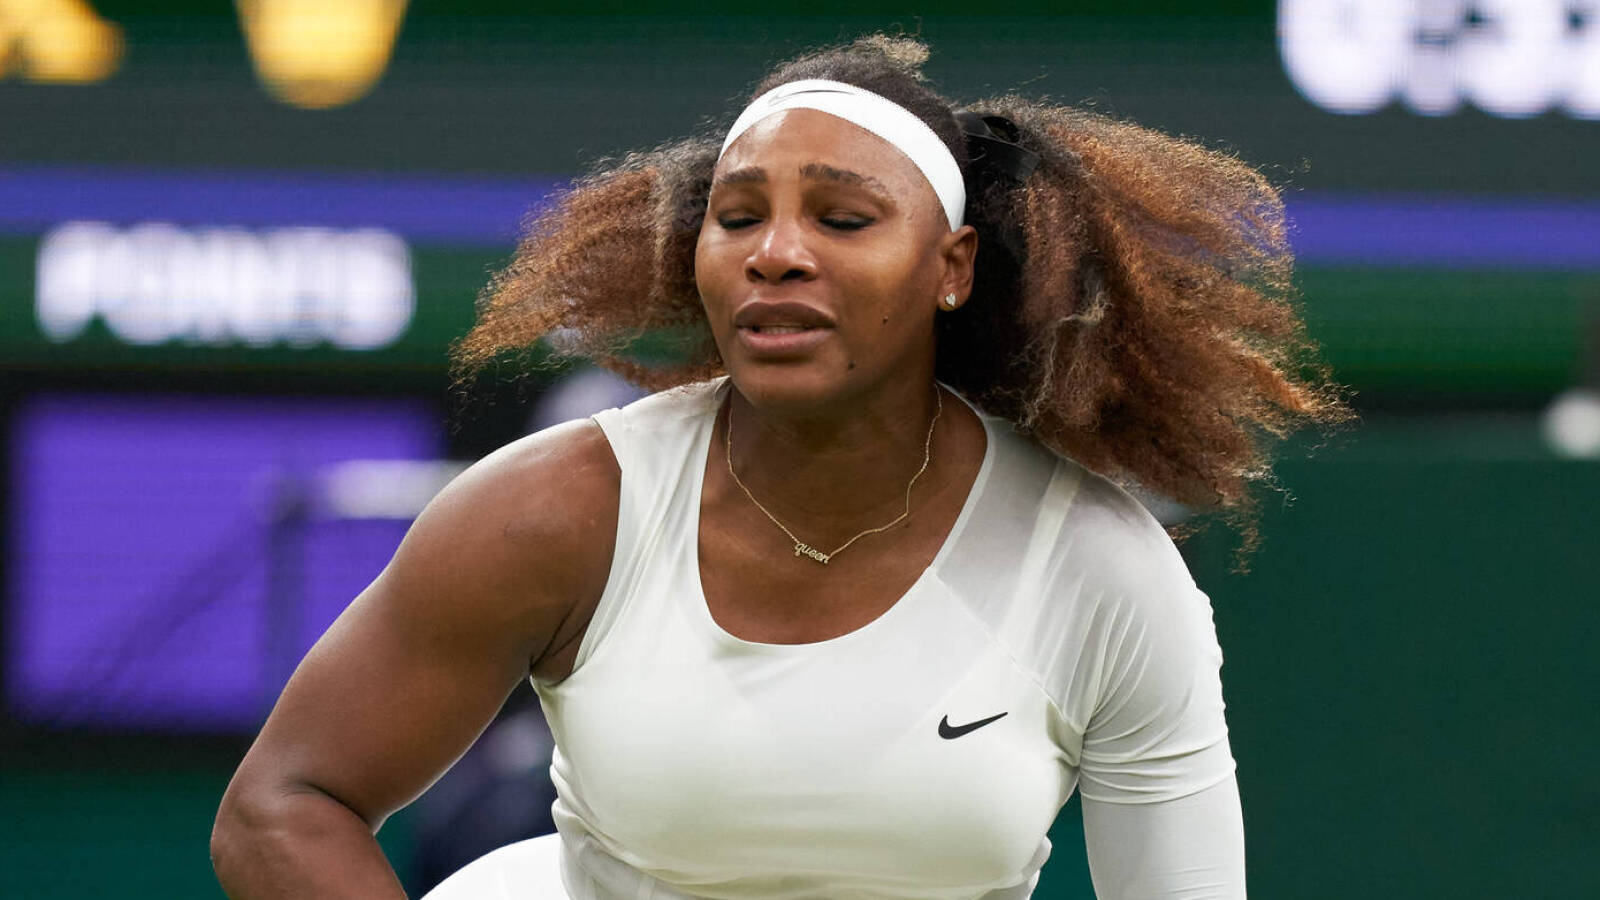 Serena Williams loses first-round match in return to Wimbledon